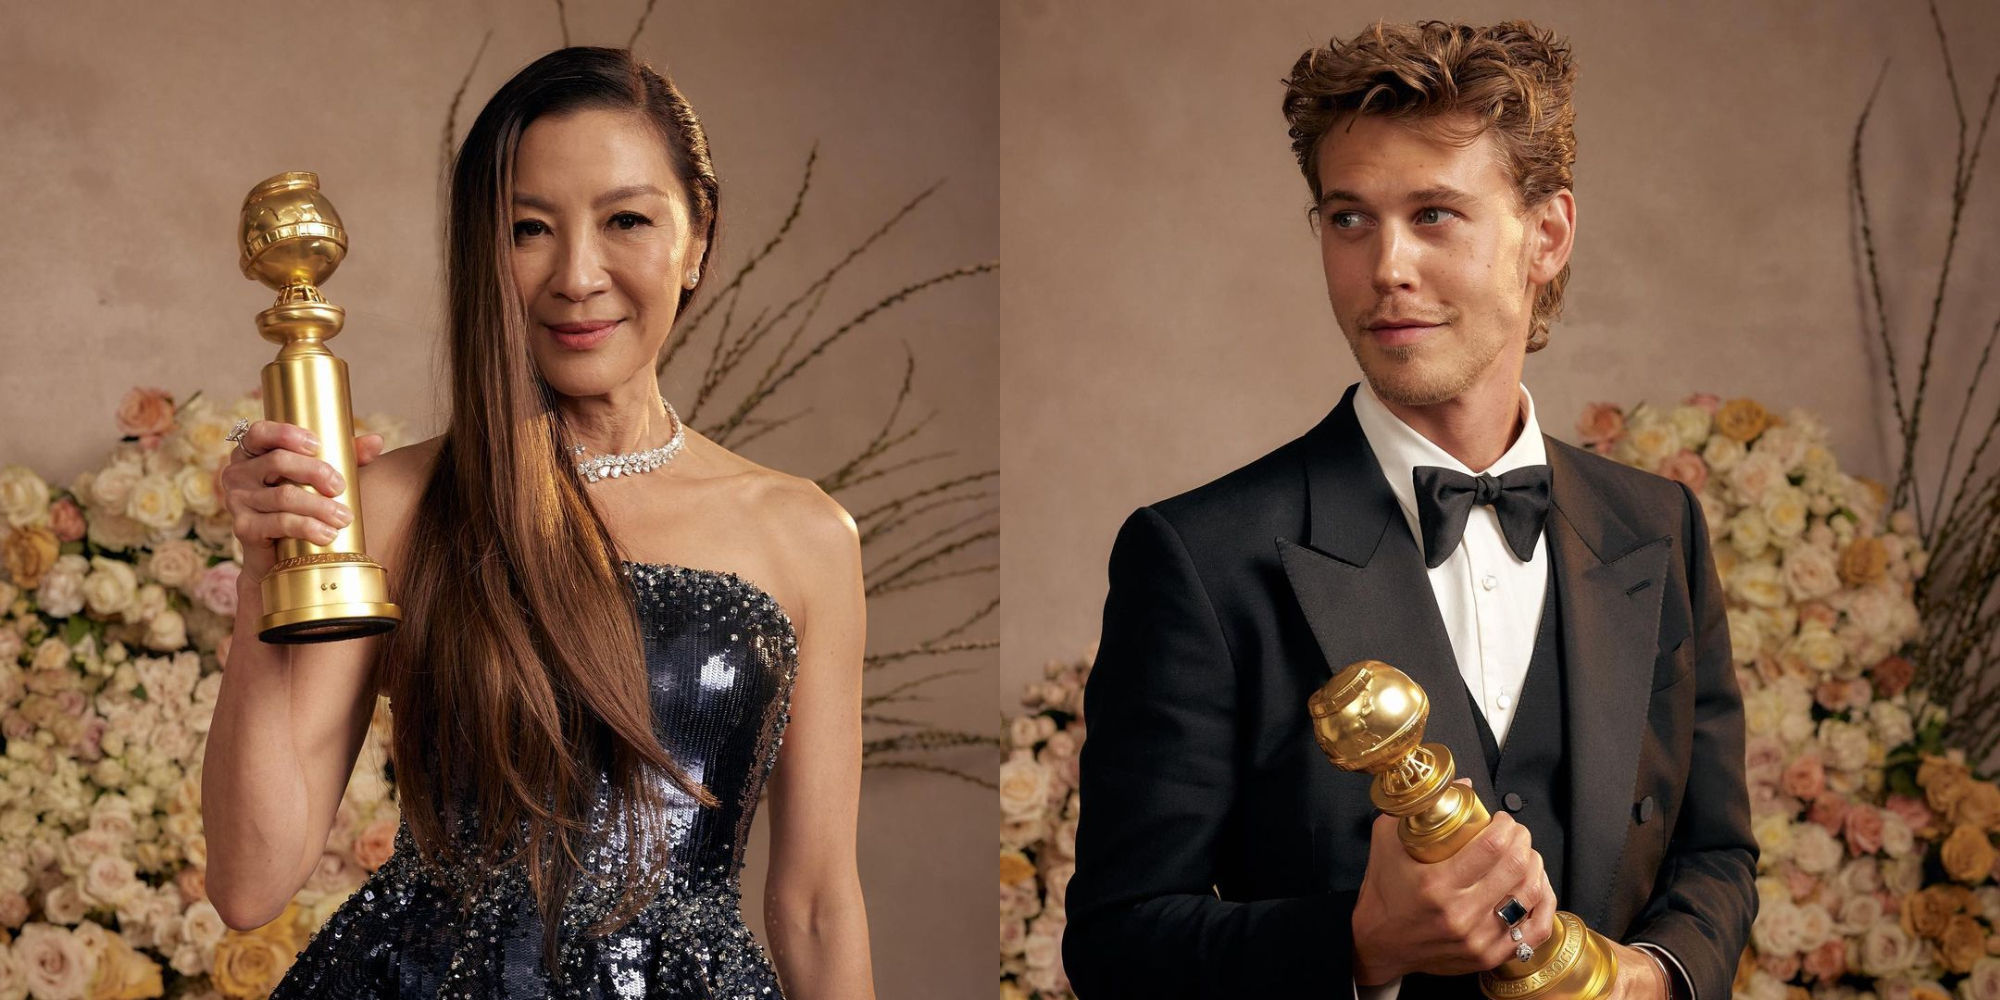 Golden Globes Awards 2023: The Winners And Other Major Highlights